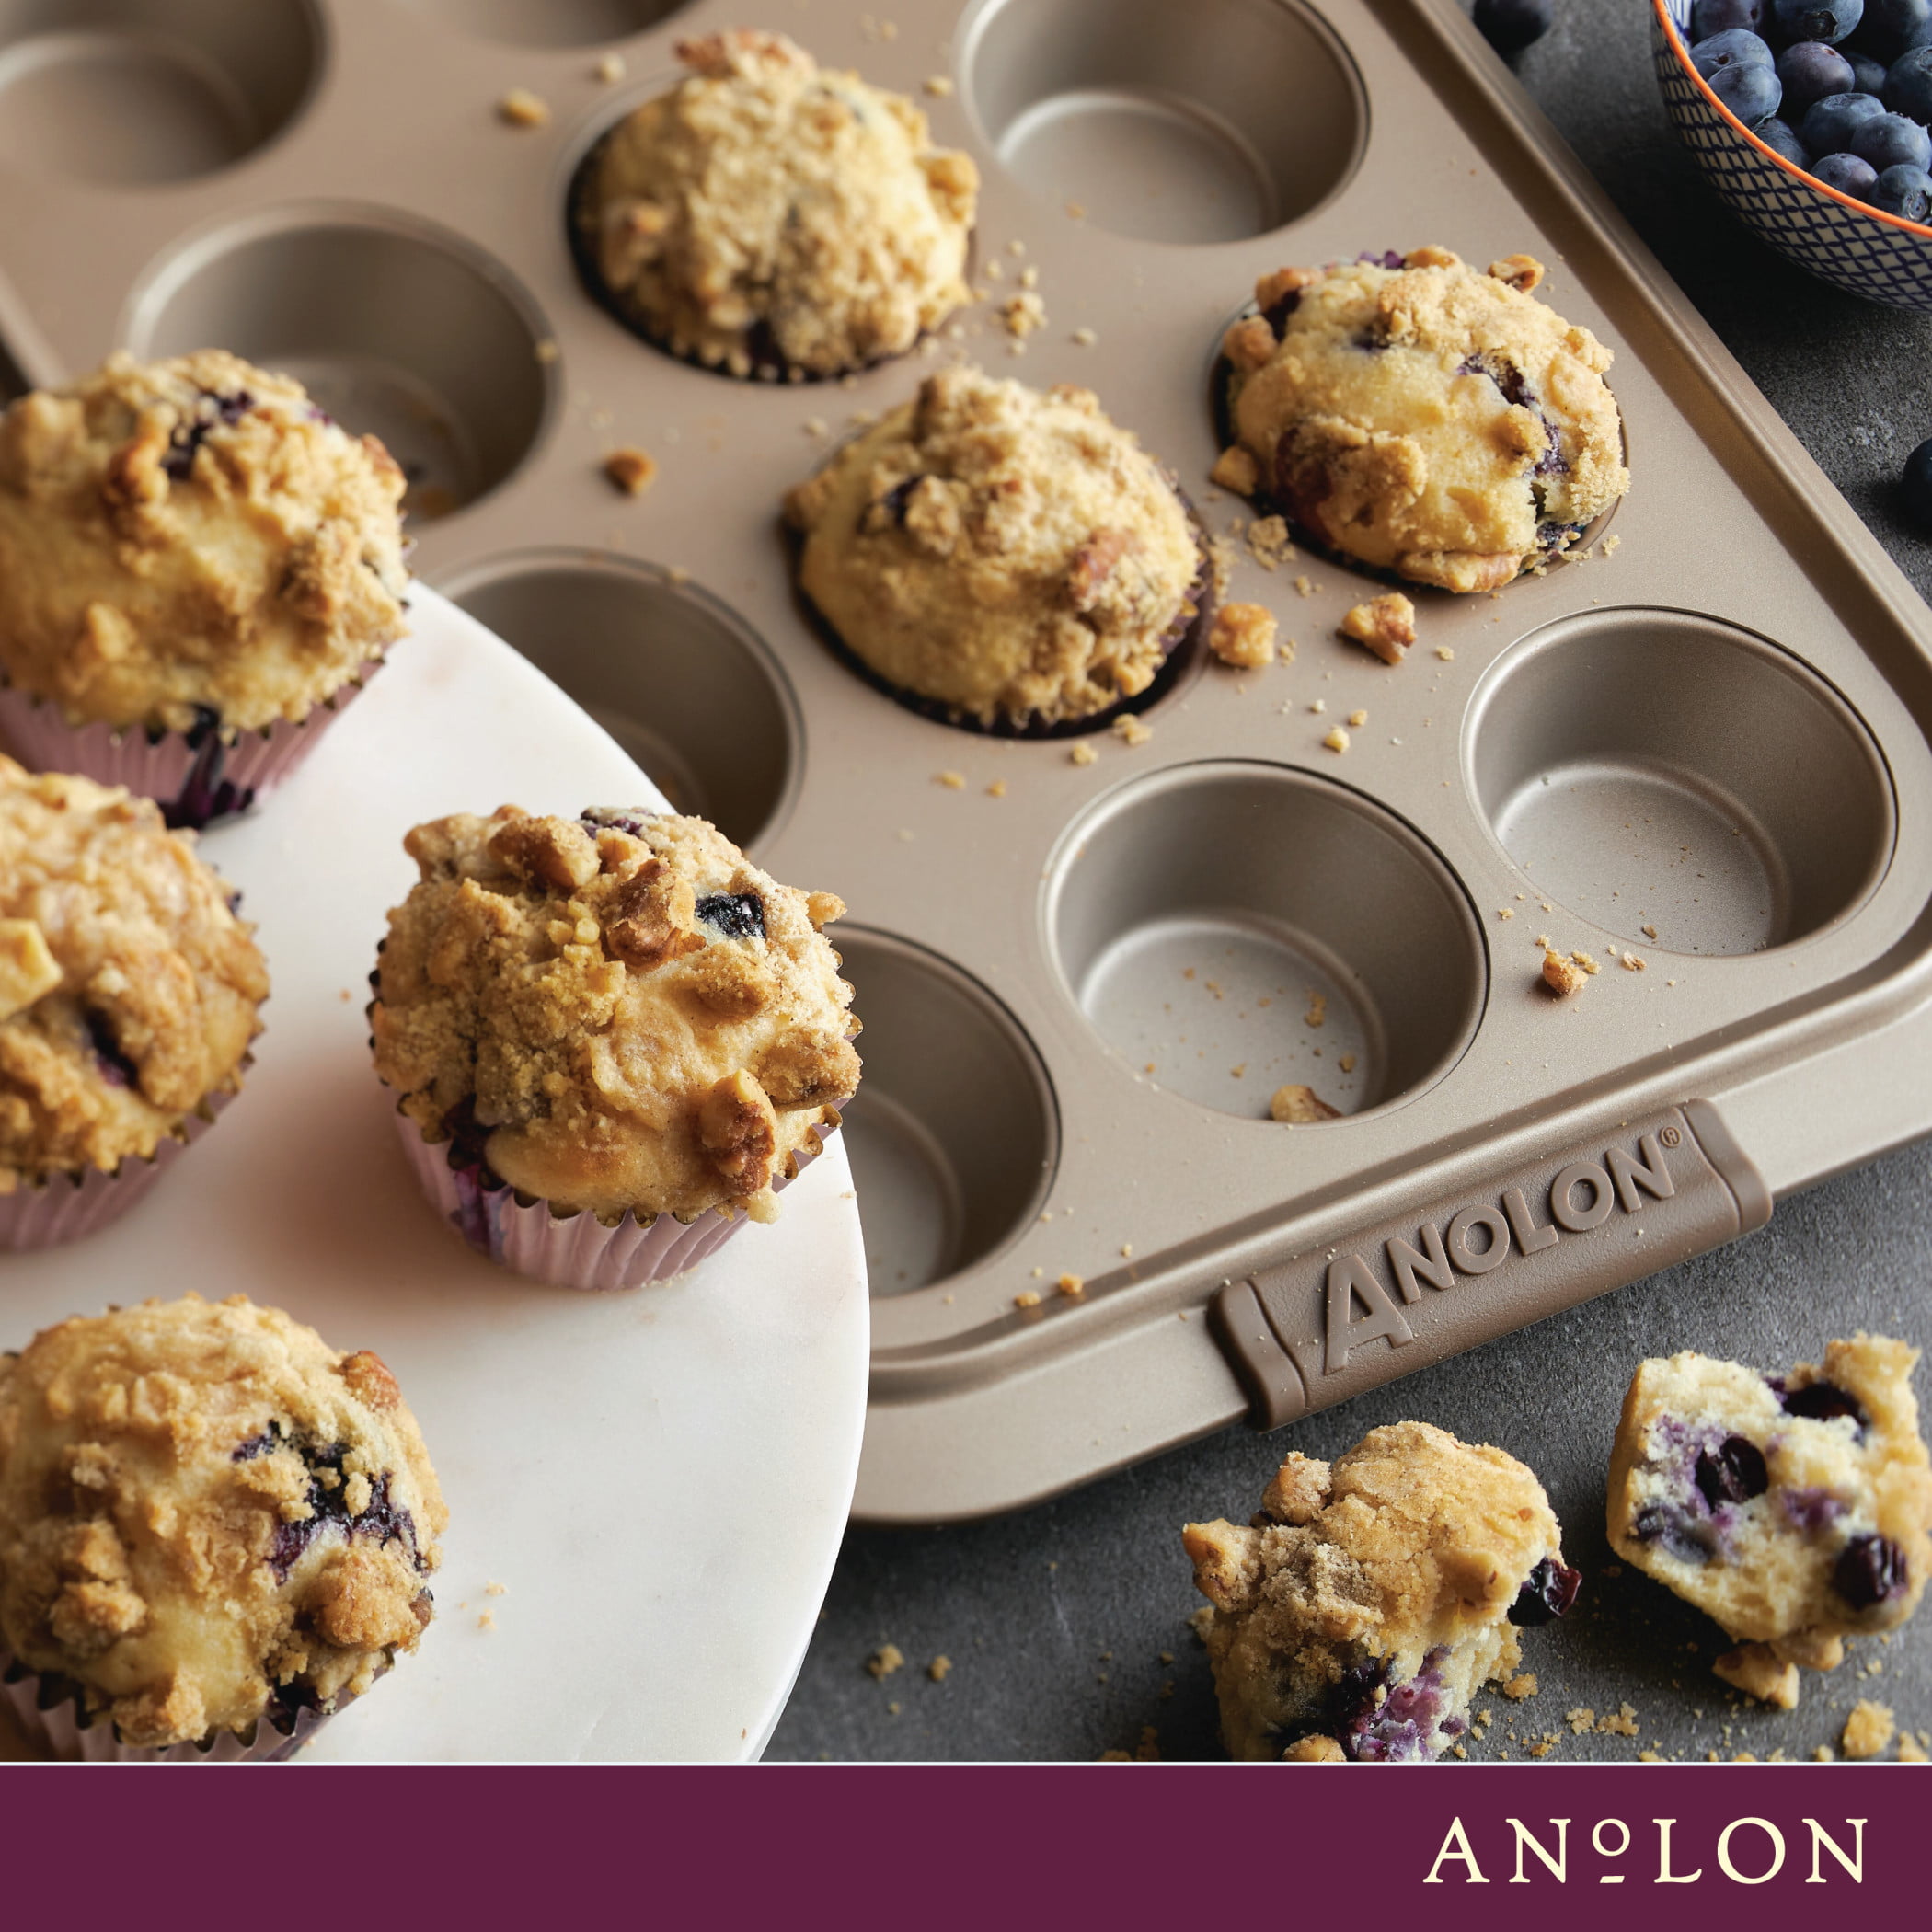 Anolon Advanced Nonstick 12-Cup Muffin Tin With Silicone Grips and Lid /  Nonstick 12-Cup Cupcake Tin With Silicone Grips and Lid - 12 Cup, Gray